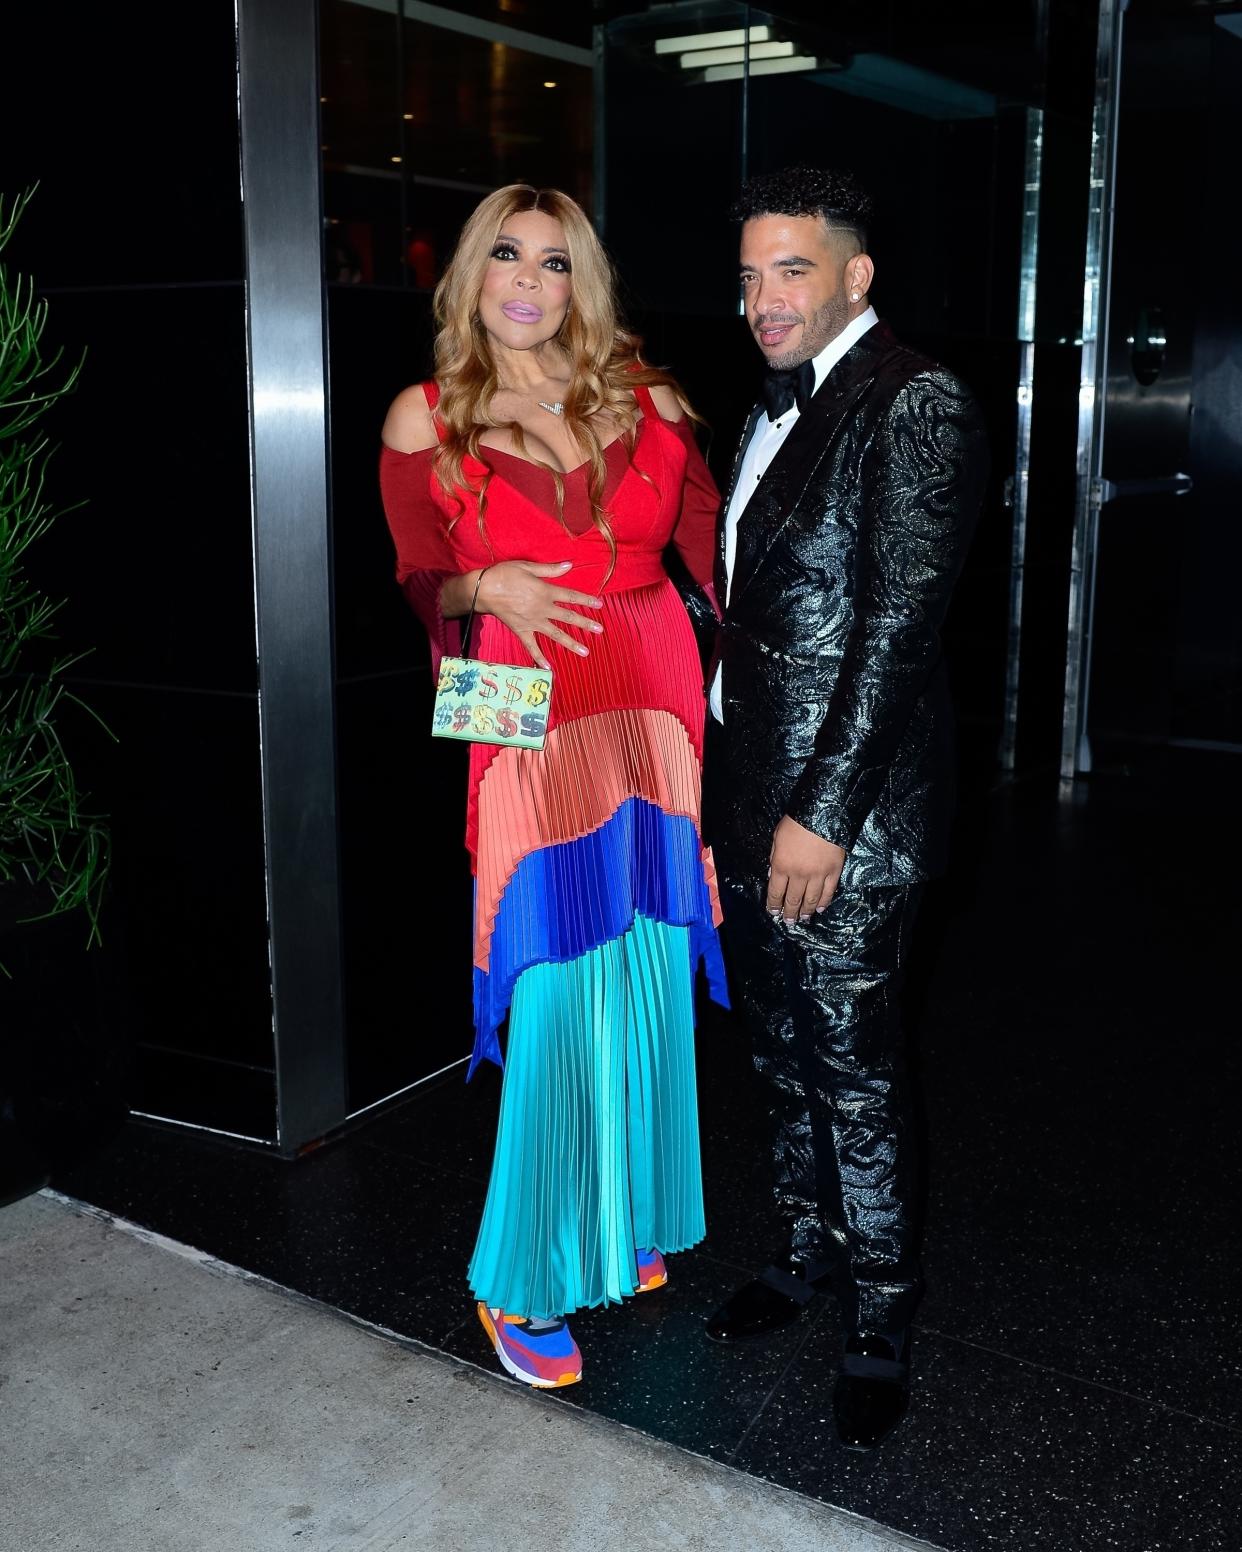 New York, NY  - Wendy Williams and Jason Lee attend the Met Gala Afterparty at The Standard Hotel in New York, NY. The talk show host looked stunning in a long pleated gown in bright colors and a pair of colorful sneakers!

Pictured: Wendy Williams, Jason Lee

BACKGRID USA 3 MAY 2022 

BYLINE MUST READ: North Woods / BACKGRID

USA: +1 310 798 9111 / usasales@backgrid.com

UK: +44 208 344 2007 / uksales@backgrid.com

*UK Clients - Pictures Containing Children
Please Pixelate Face Prior To Publication*